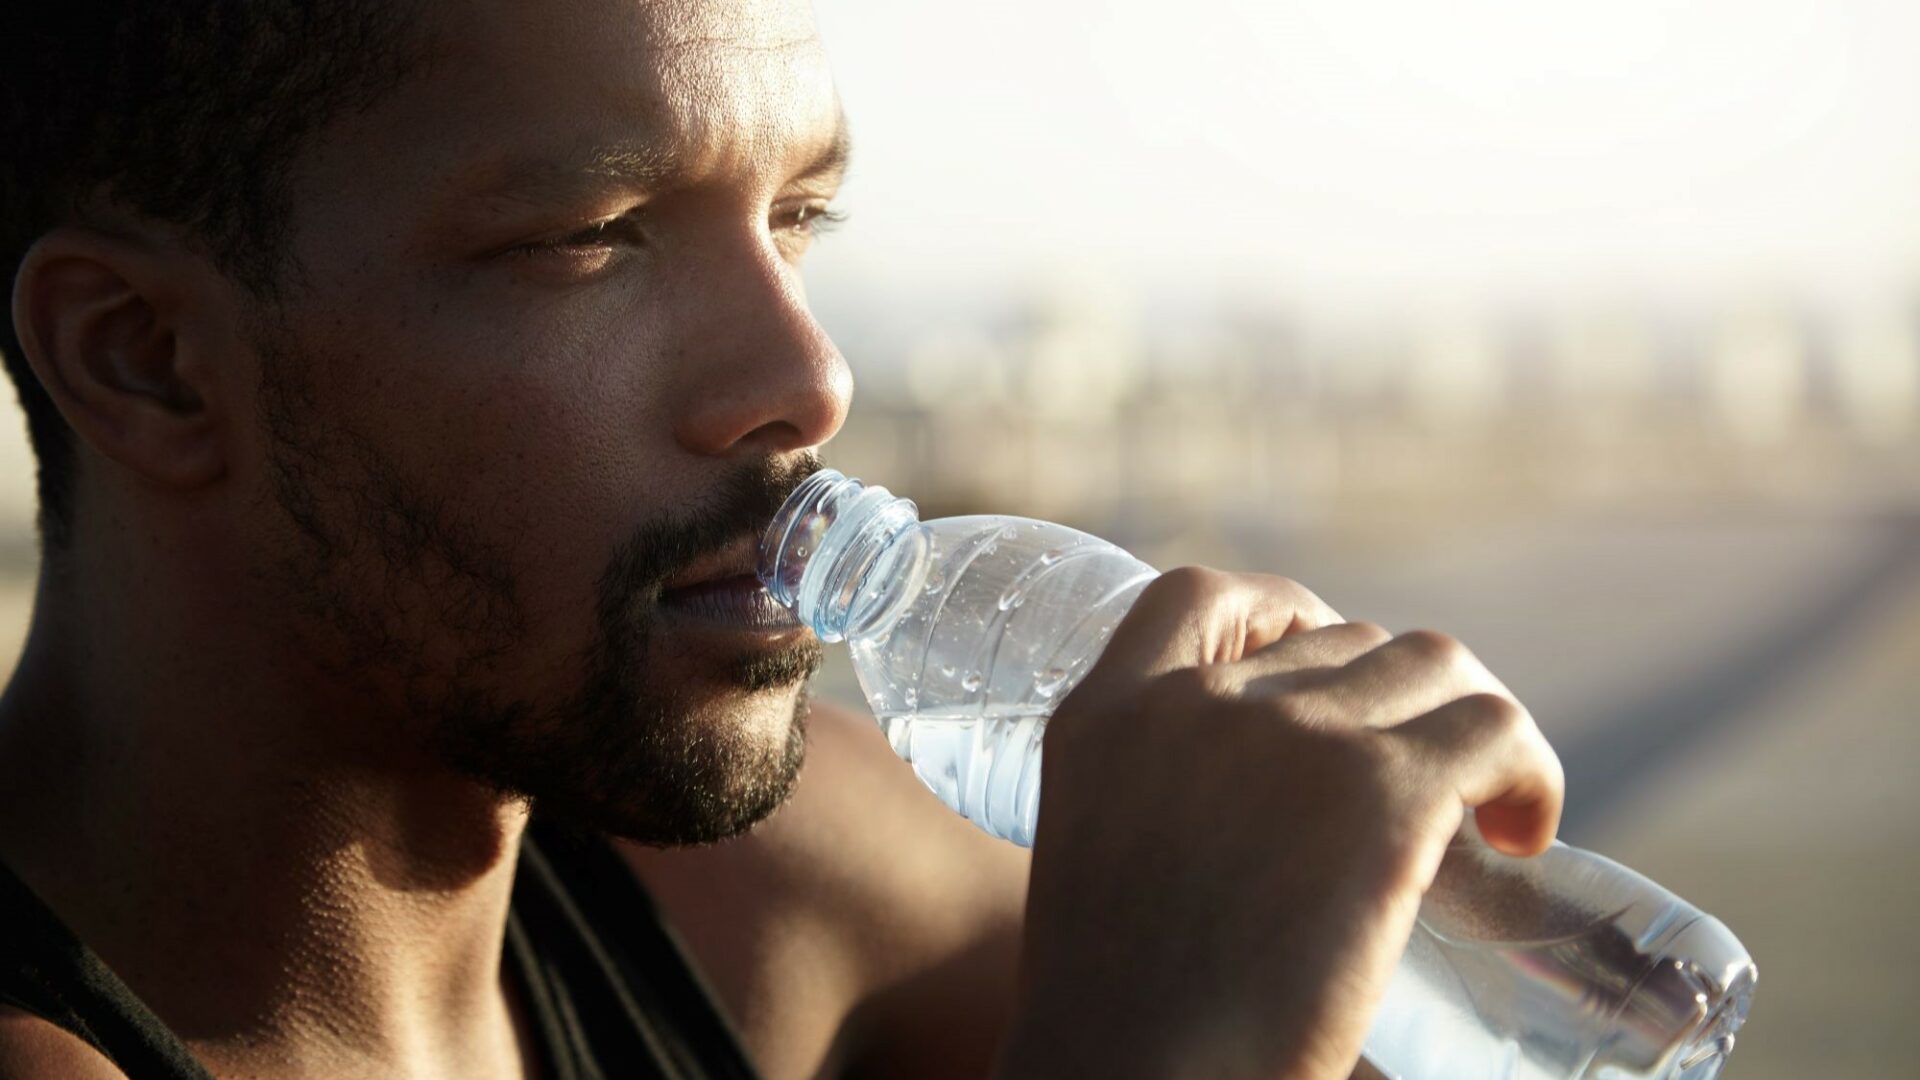 A dark-skinned, male tradie looks into the distance while drinking water.